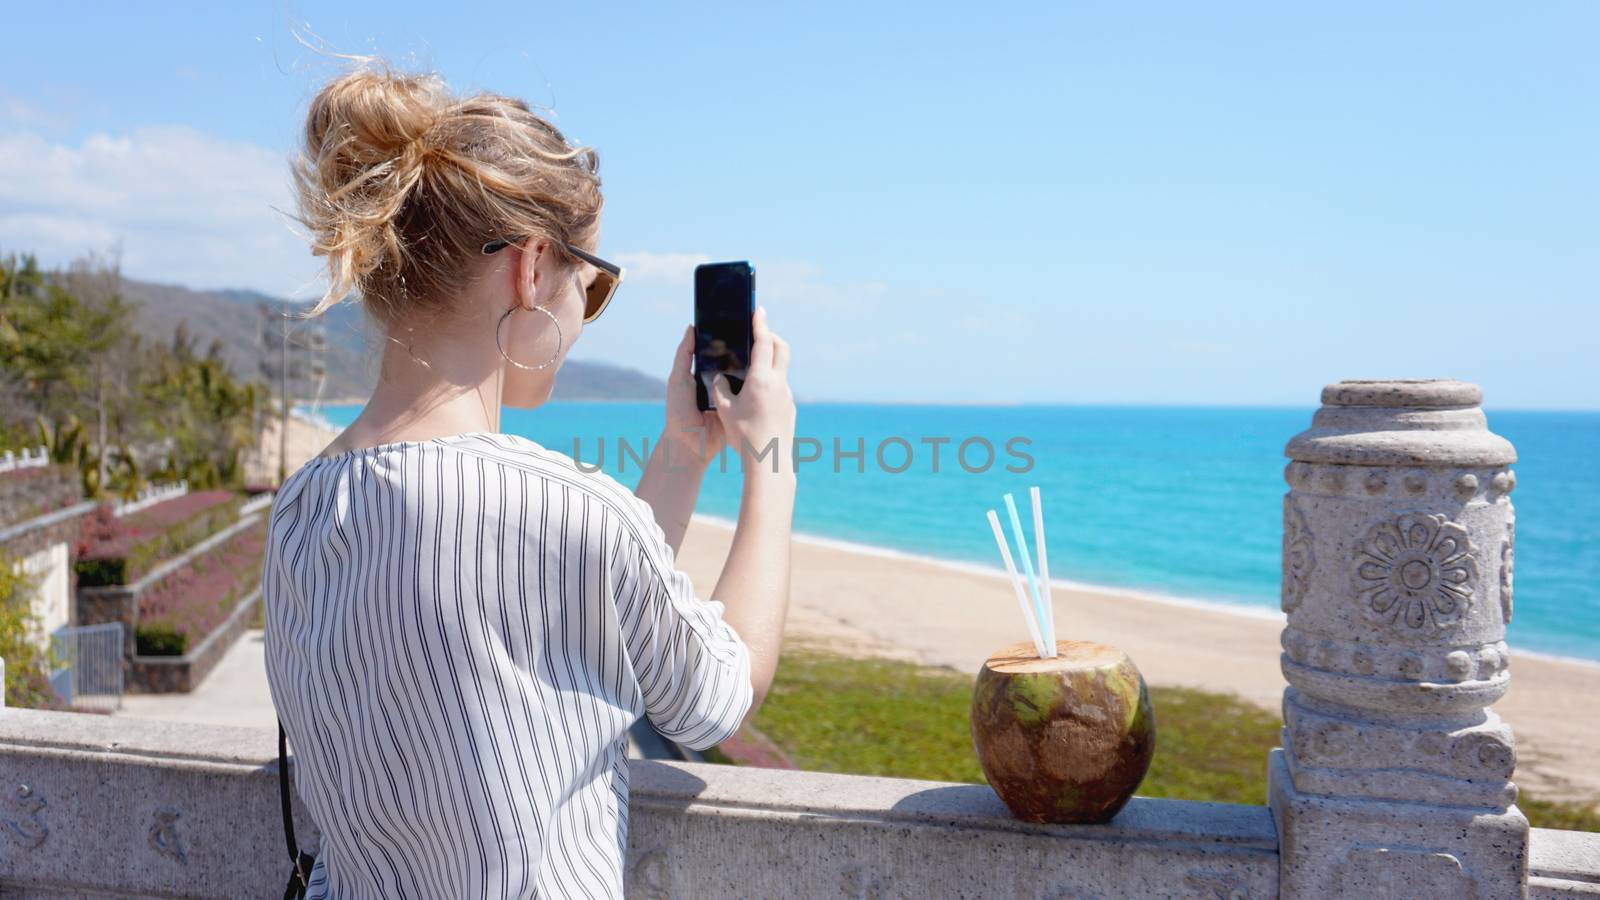 A beautiful young woman on a tropical beach with a phone in her hands by natali_brill